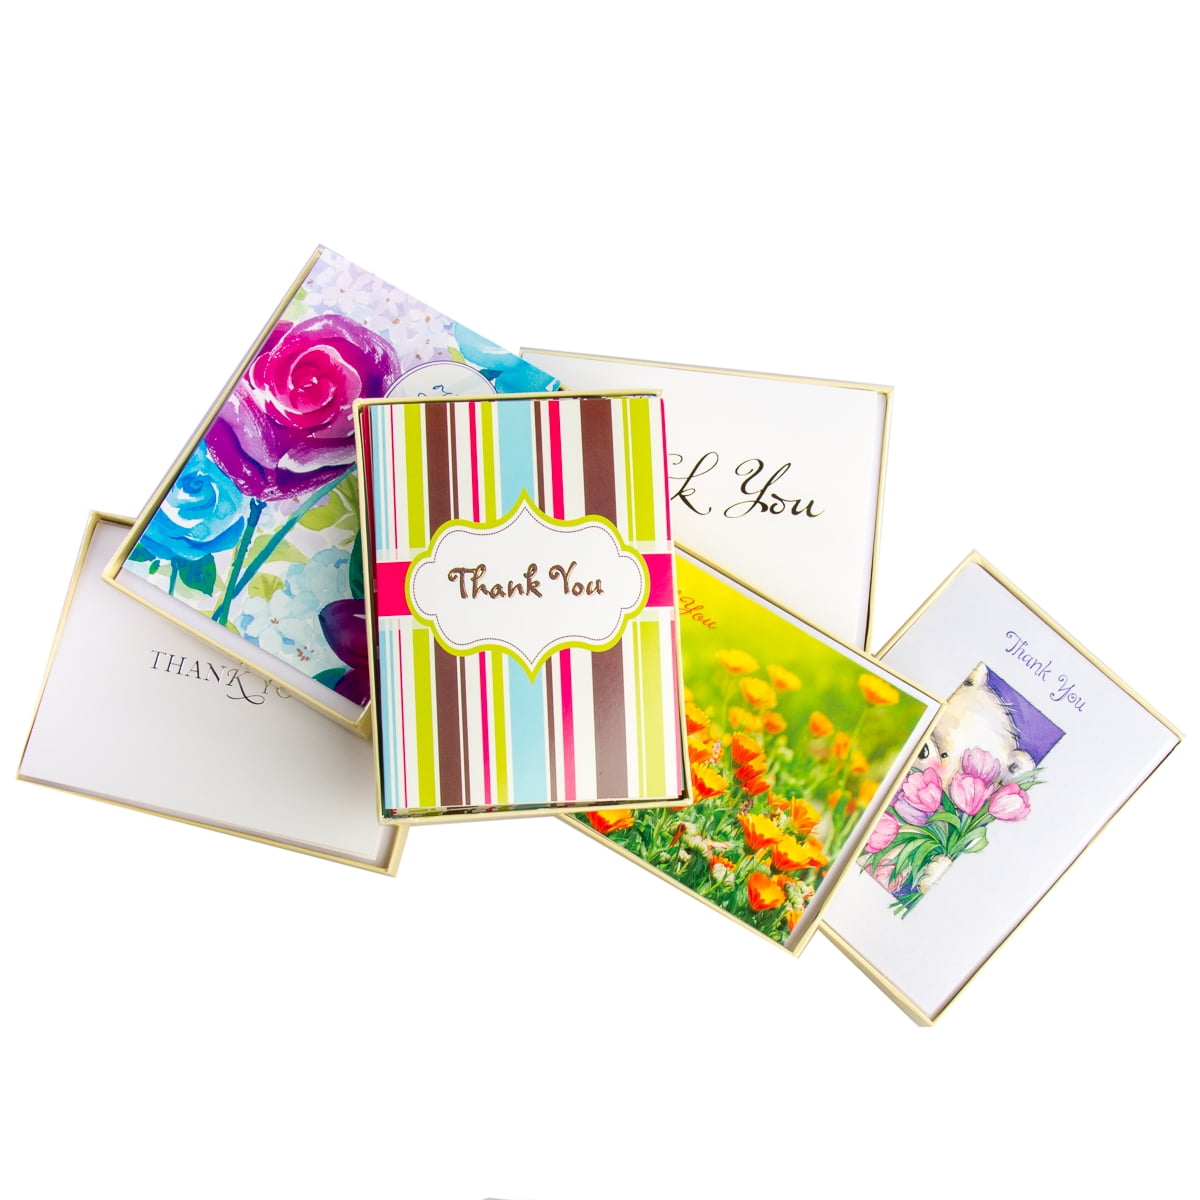 Blank Notecards Stationary Set for Personalized Greeting Cards-4x5.5 48 Striped Gold Foil Blank Note Cards with Envelopes 6 Assorted Cards for All Occasions Blank Cards with Envelopes 